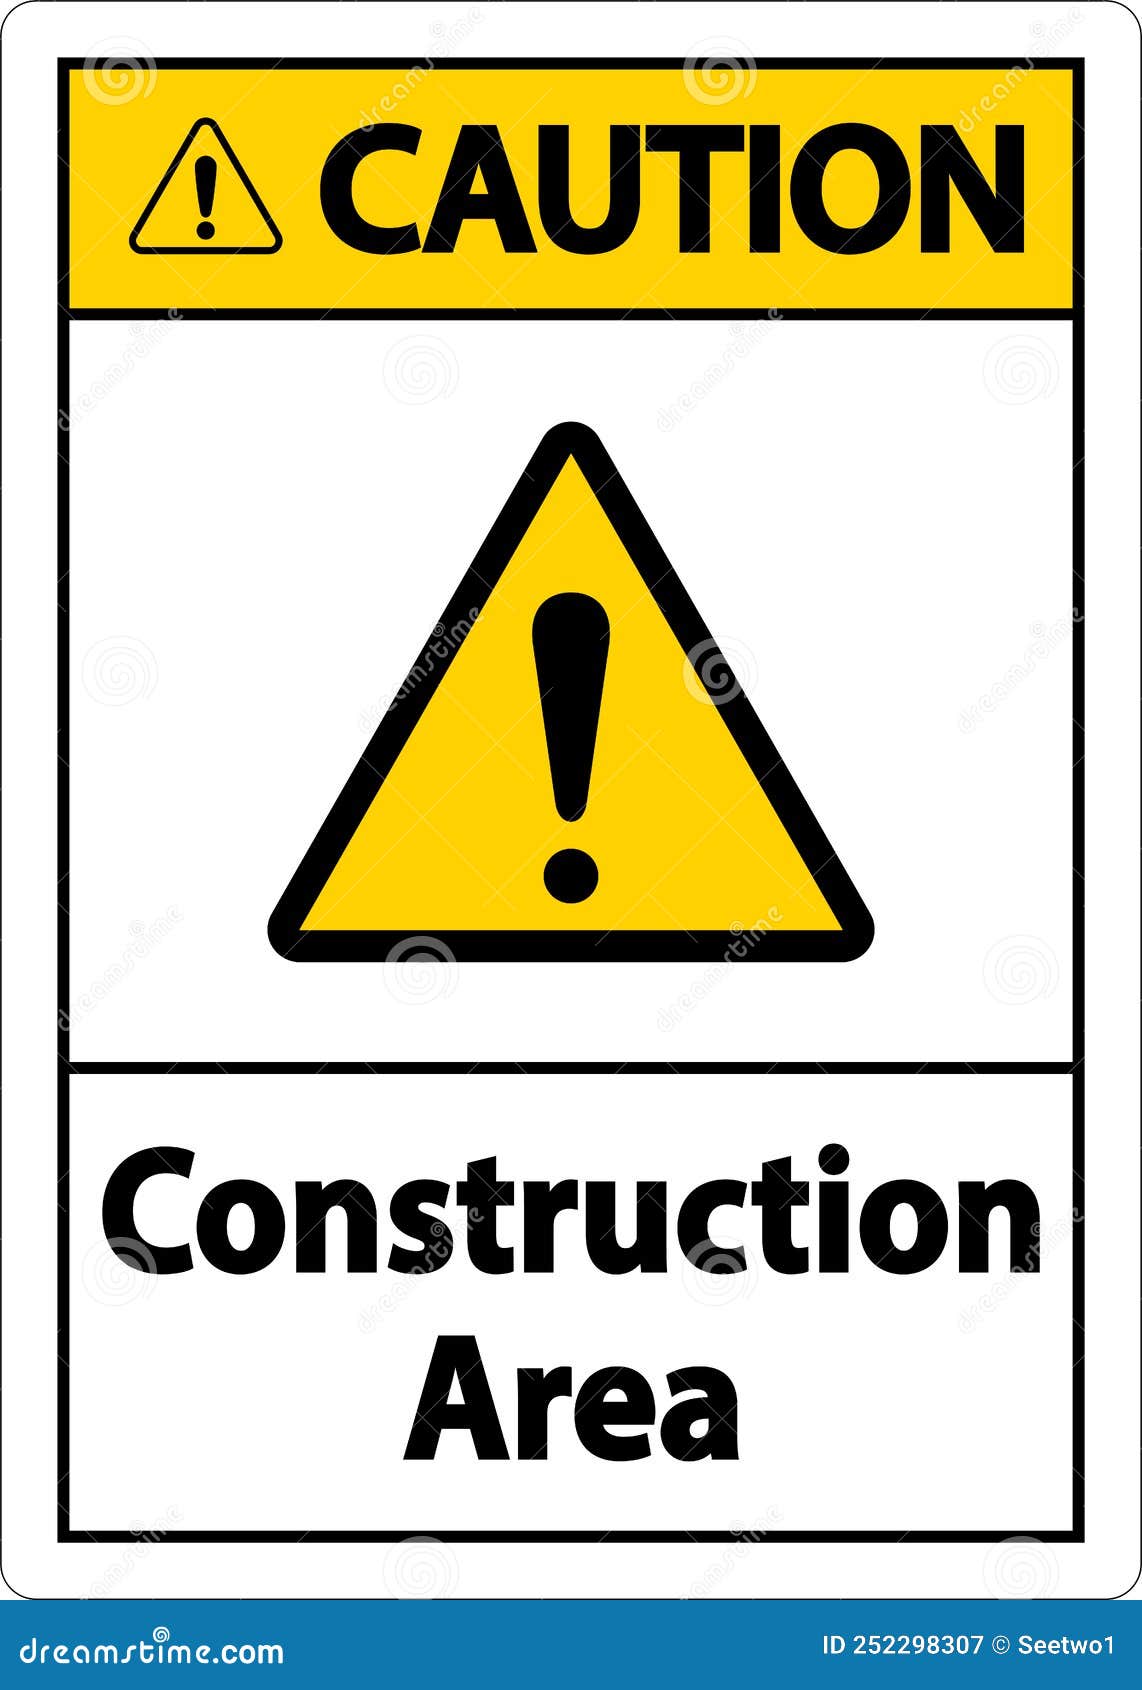 Caution Construction Area Symbol Sign on White Background Stock Vector ...